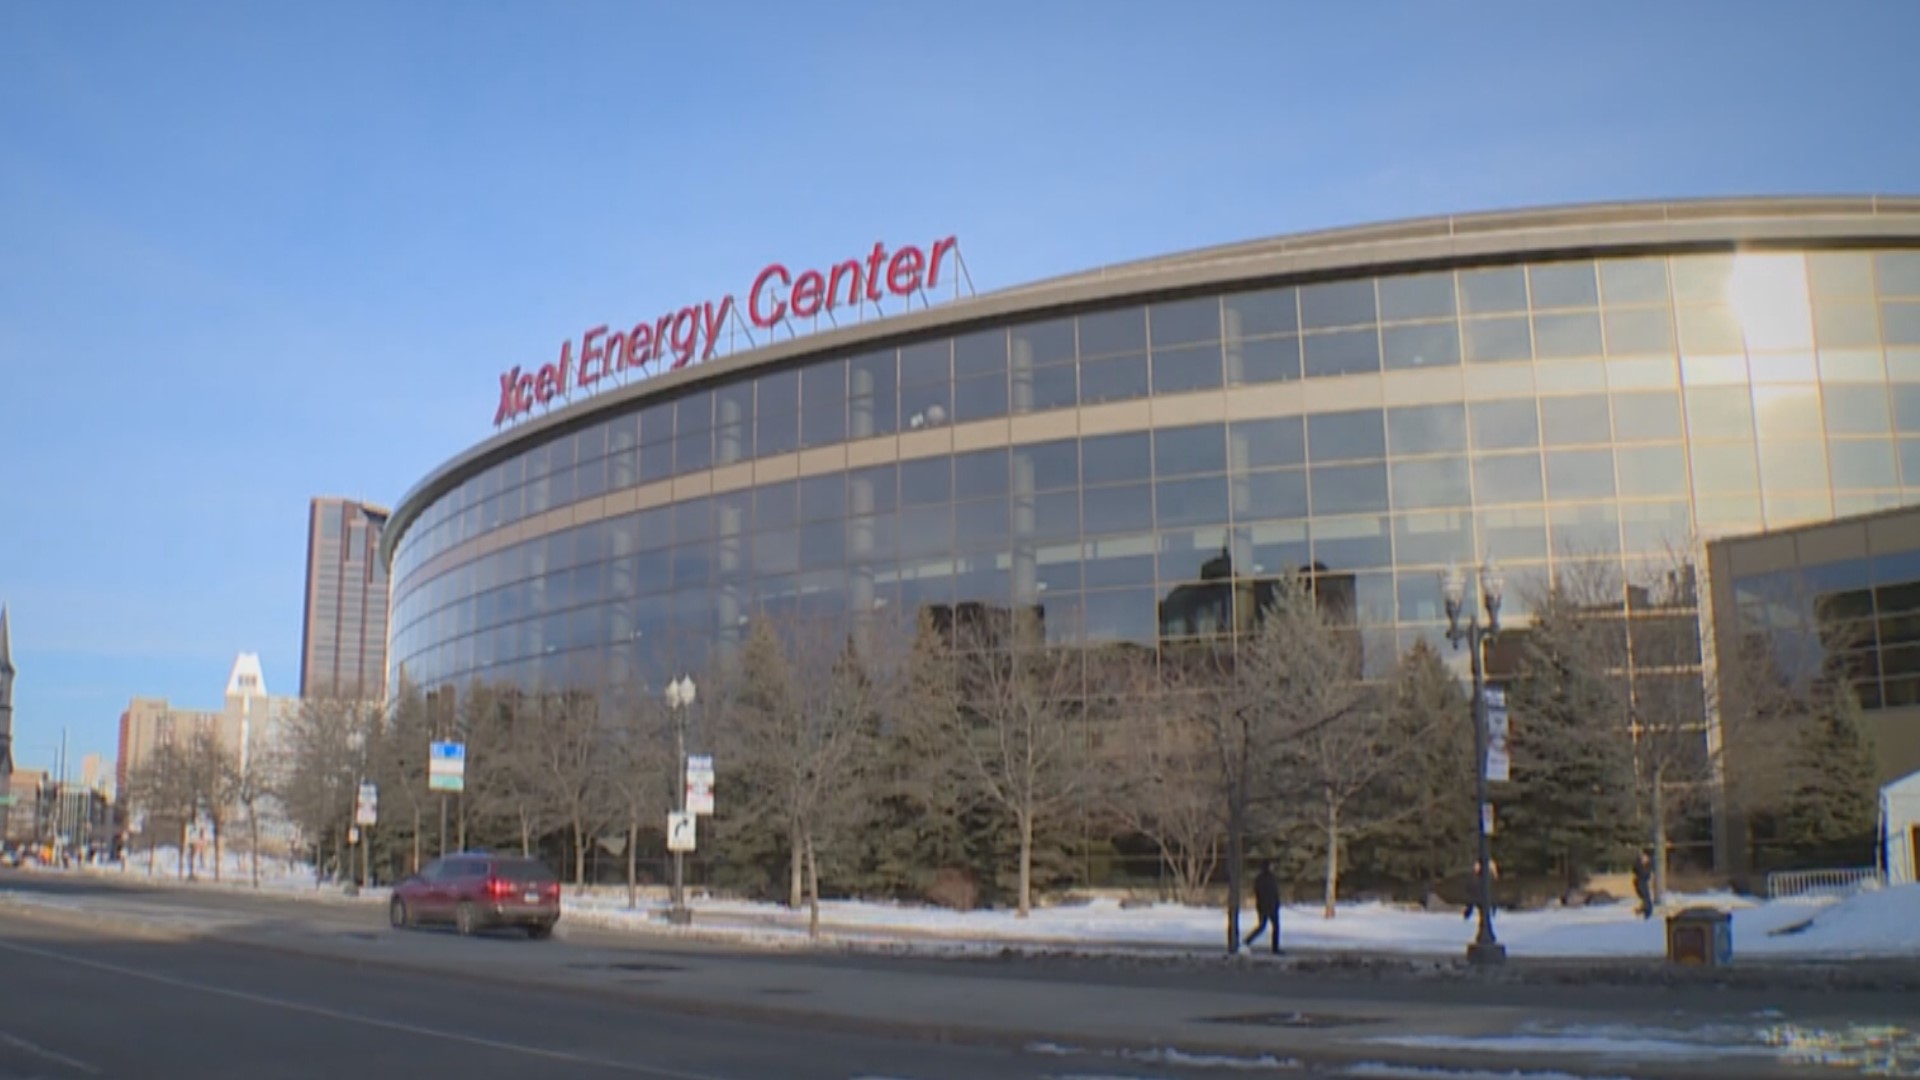 Minnesota's PWHL team still doesn't have a name, but it has a lot of local talent and will play games at the Xcel Energy Center.